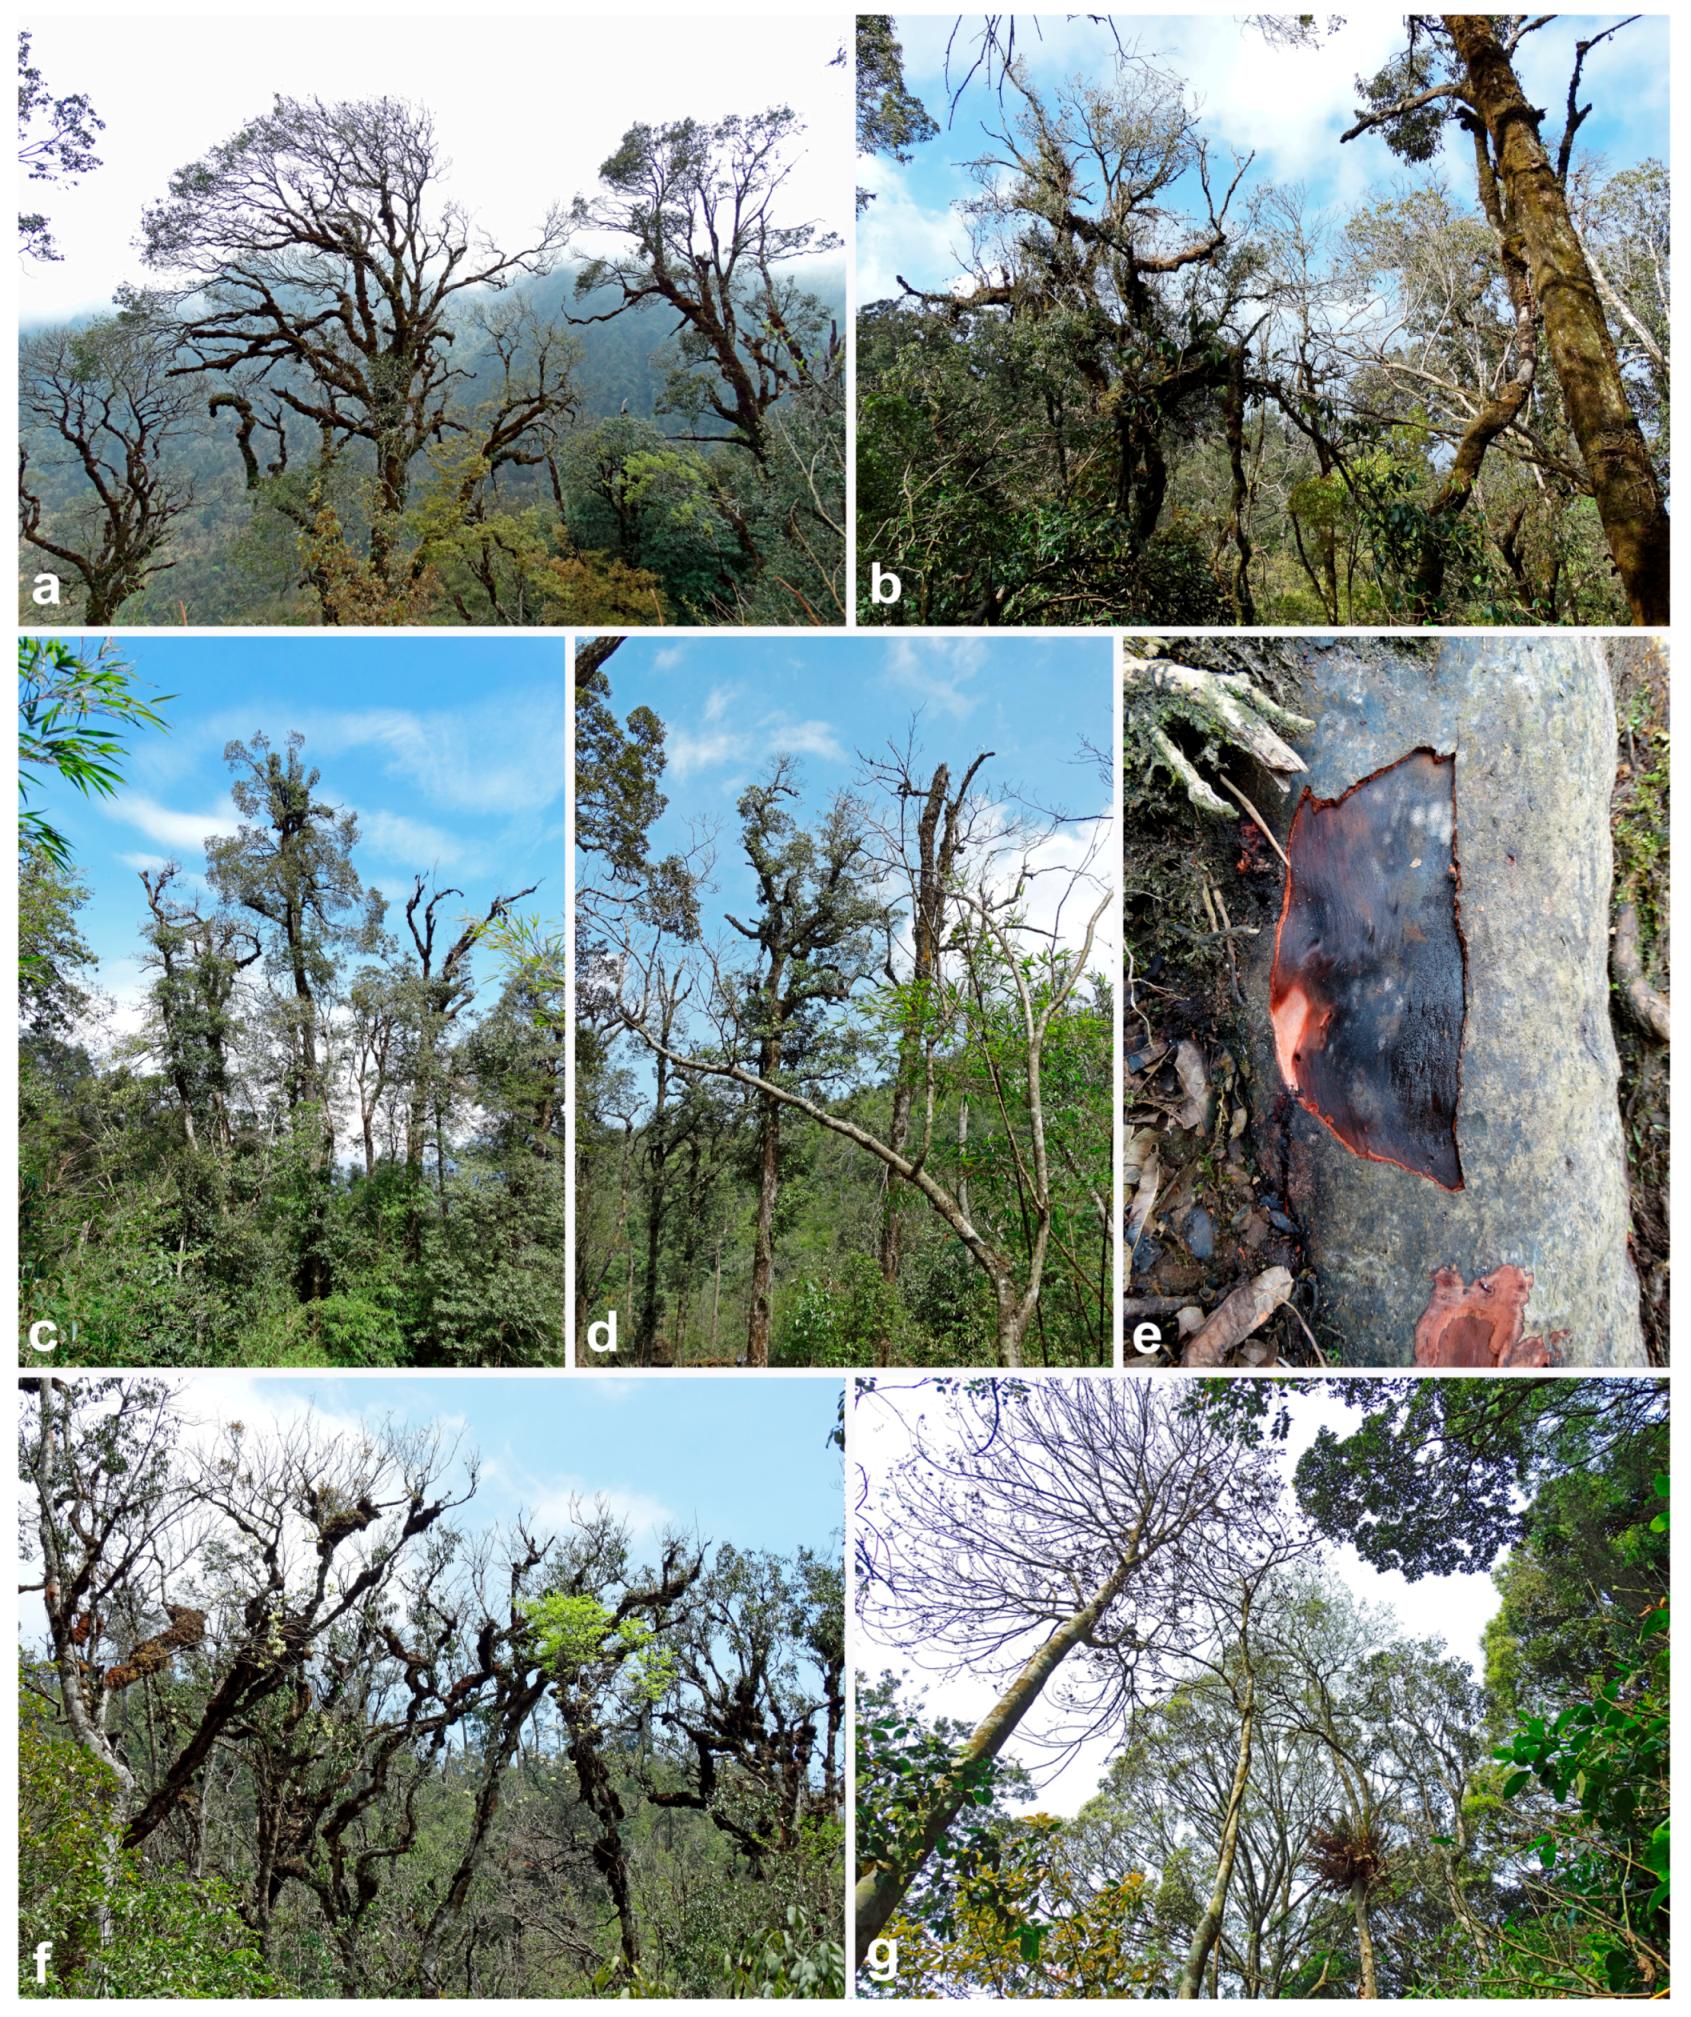 Pak at lægge konkurs helvede Forests | Free Full-Text | A Survey in Natural Forest Ecosystems of Vietnam  Reveals High Diversity of both New and Described Phytophthora Taxa  including P. ramorum | HTML